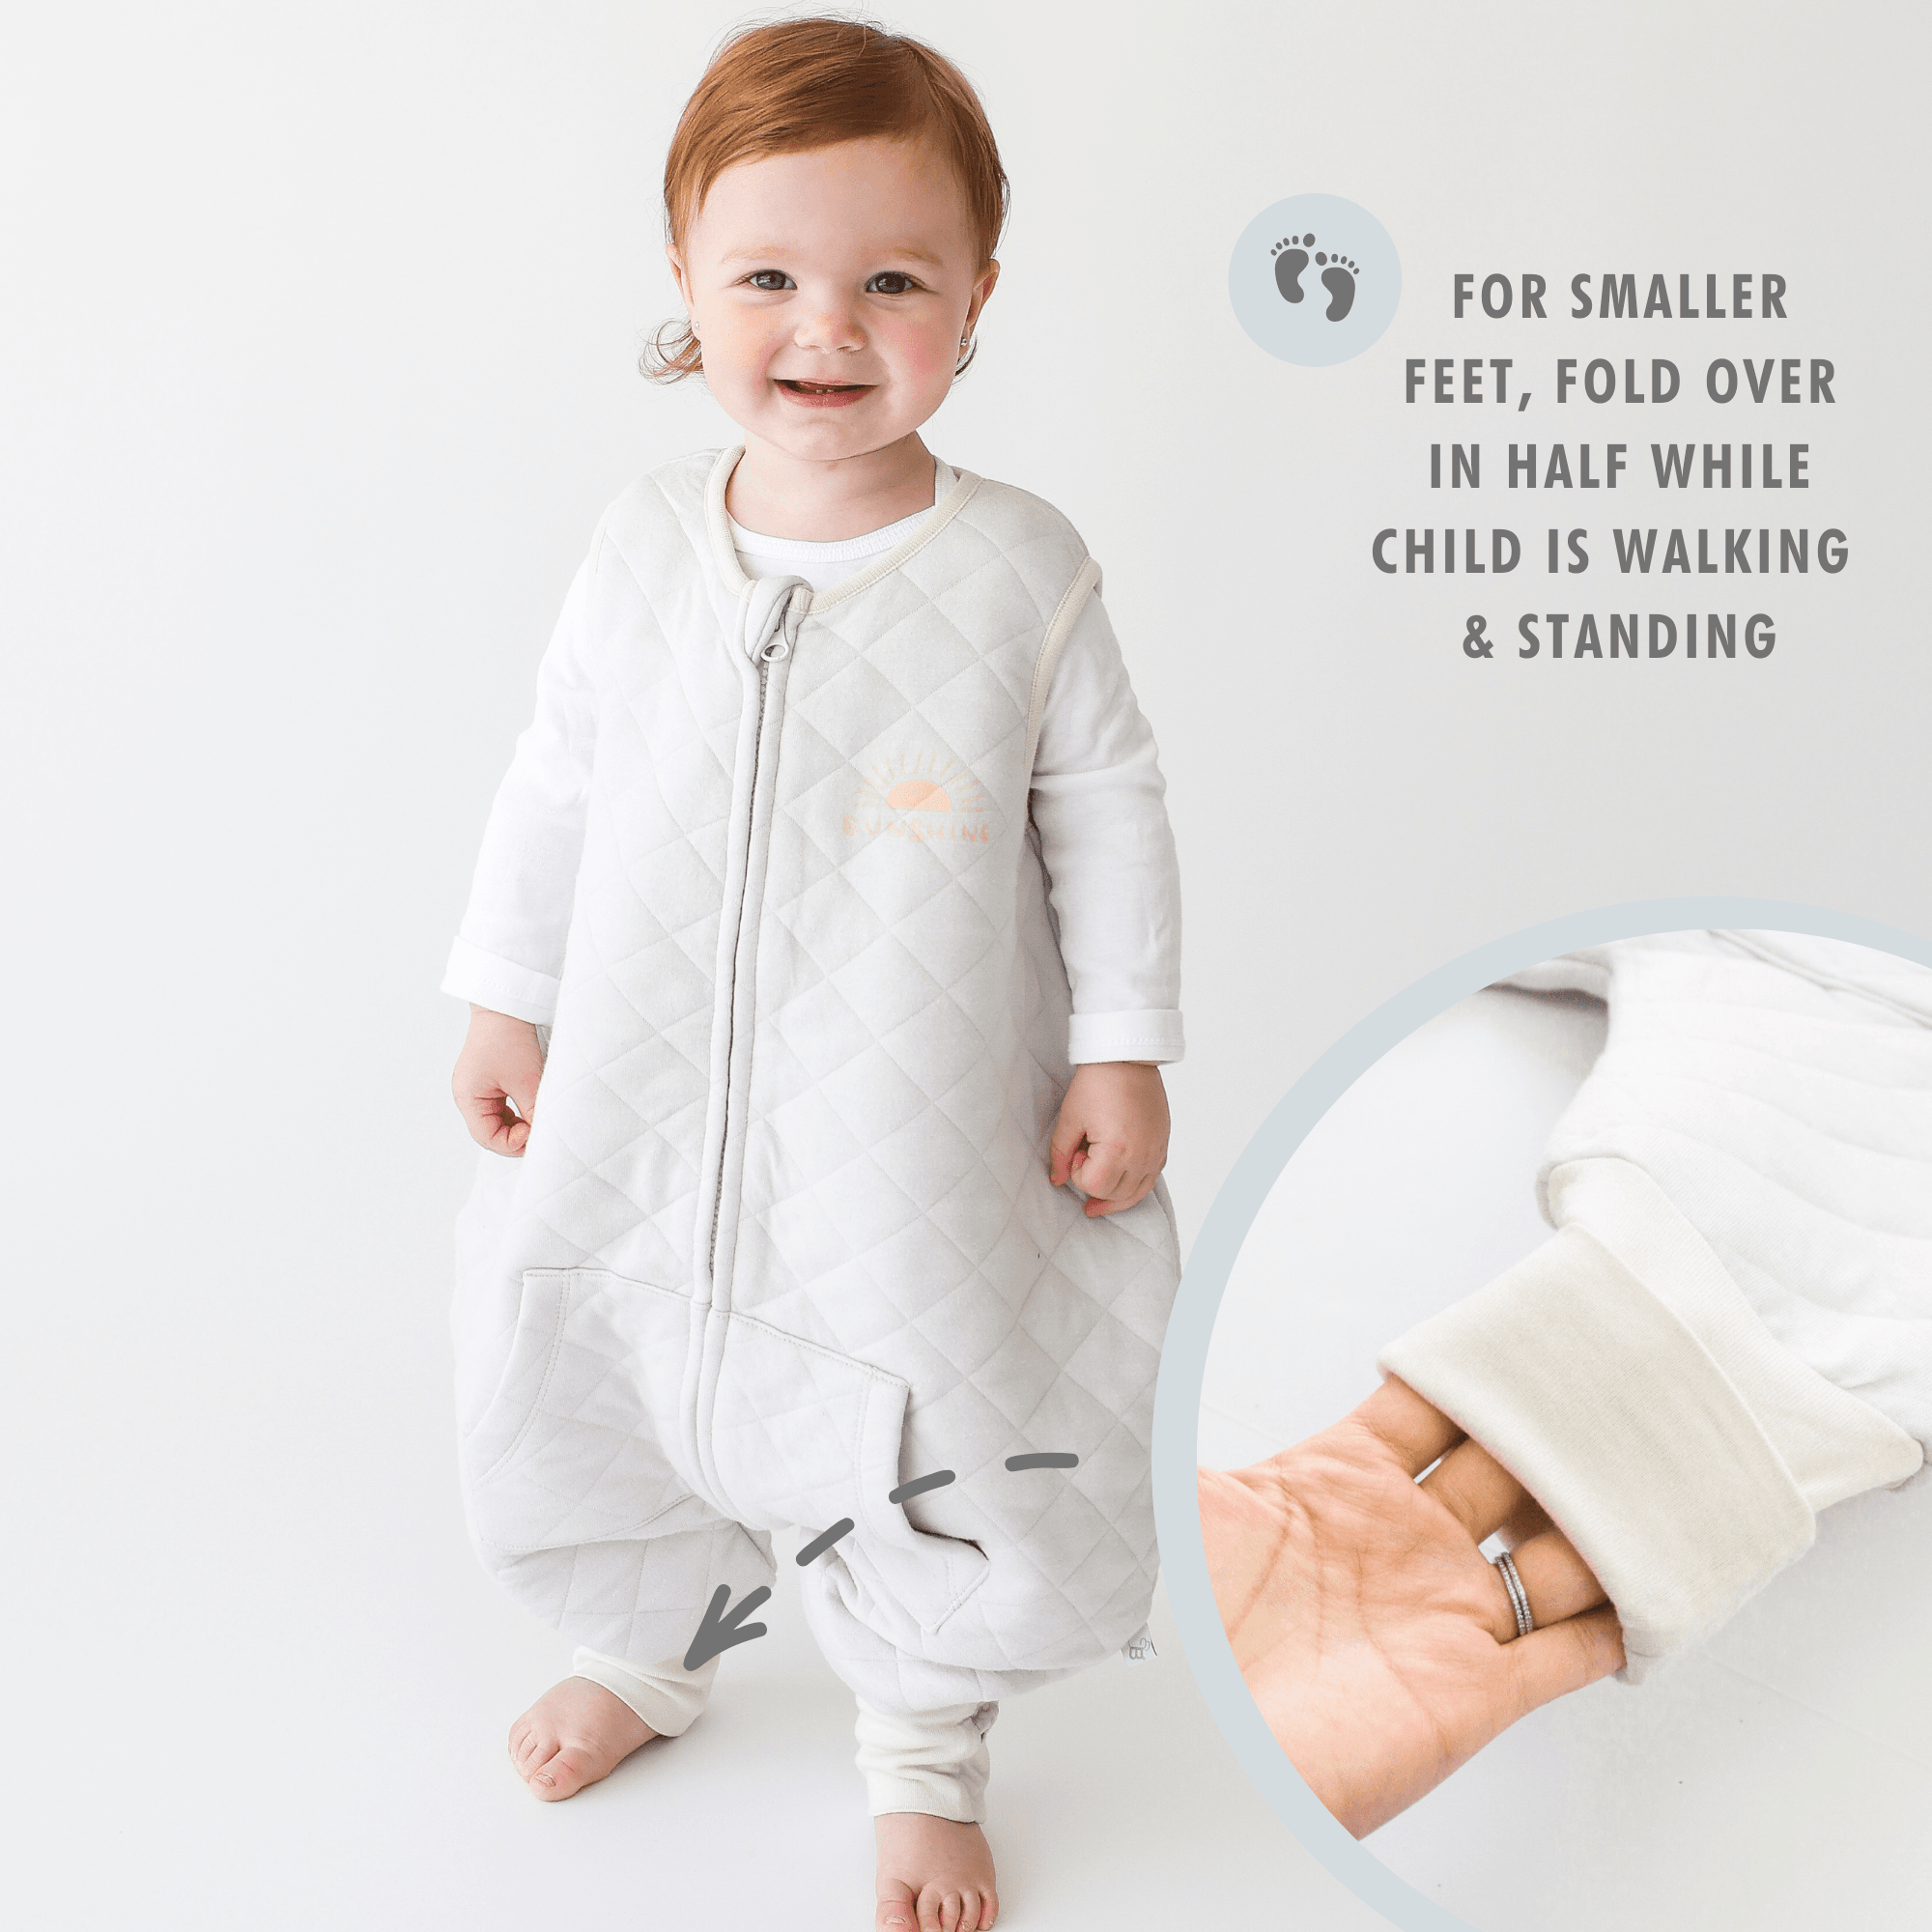 Tealbee Sunshine Dreamsuit Sleep Sack for toddlers - for small feet, fold over in half while child is walking and standing.